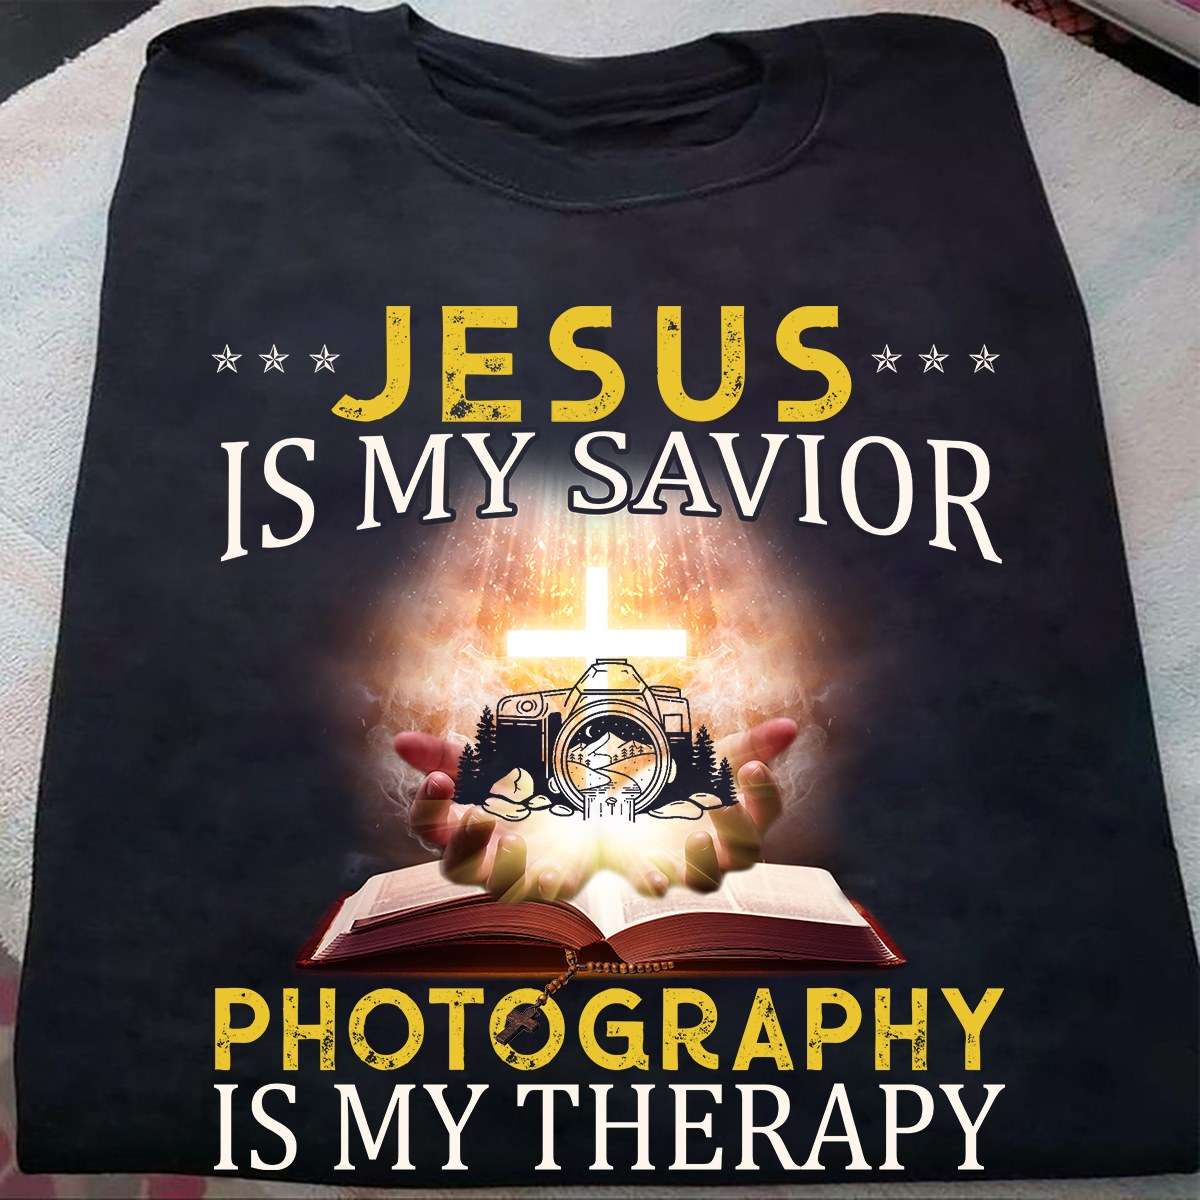 Jesus is my savior, photography is my therapy - Jesus and photography